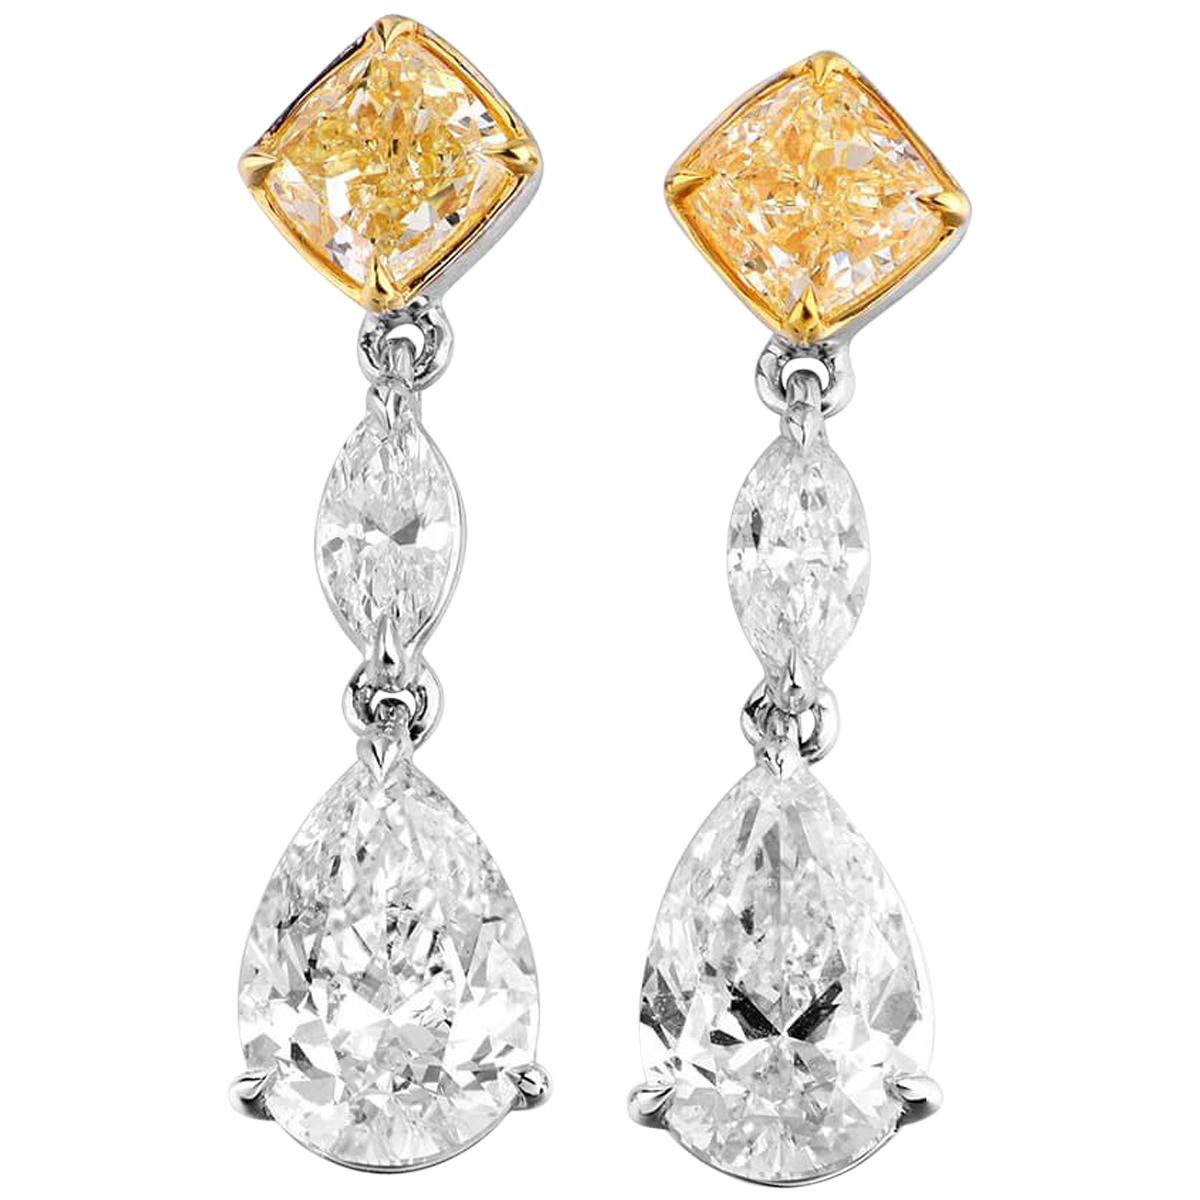 GIA Certified White Gold Diamond Earrings, 3.16 Carat For Sale